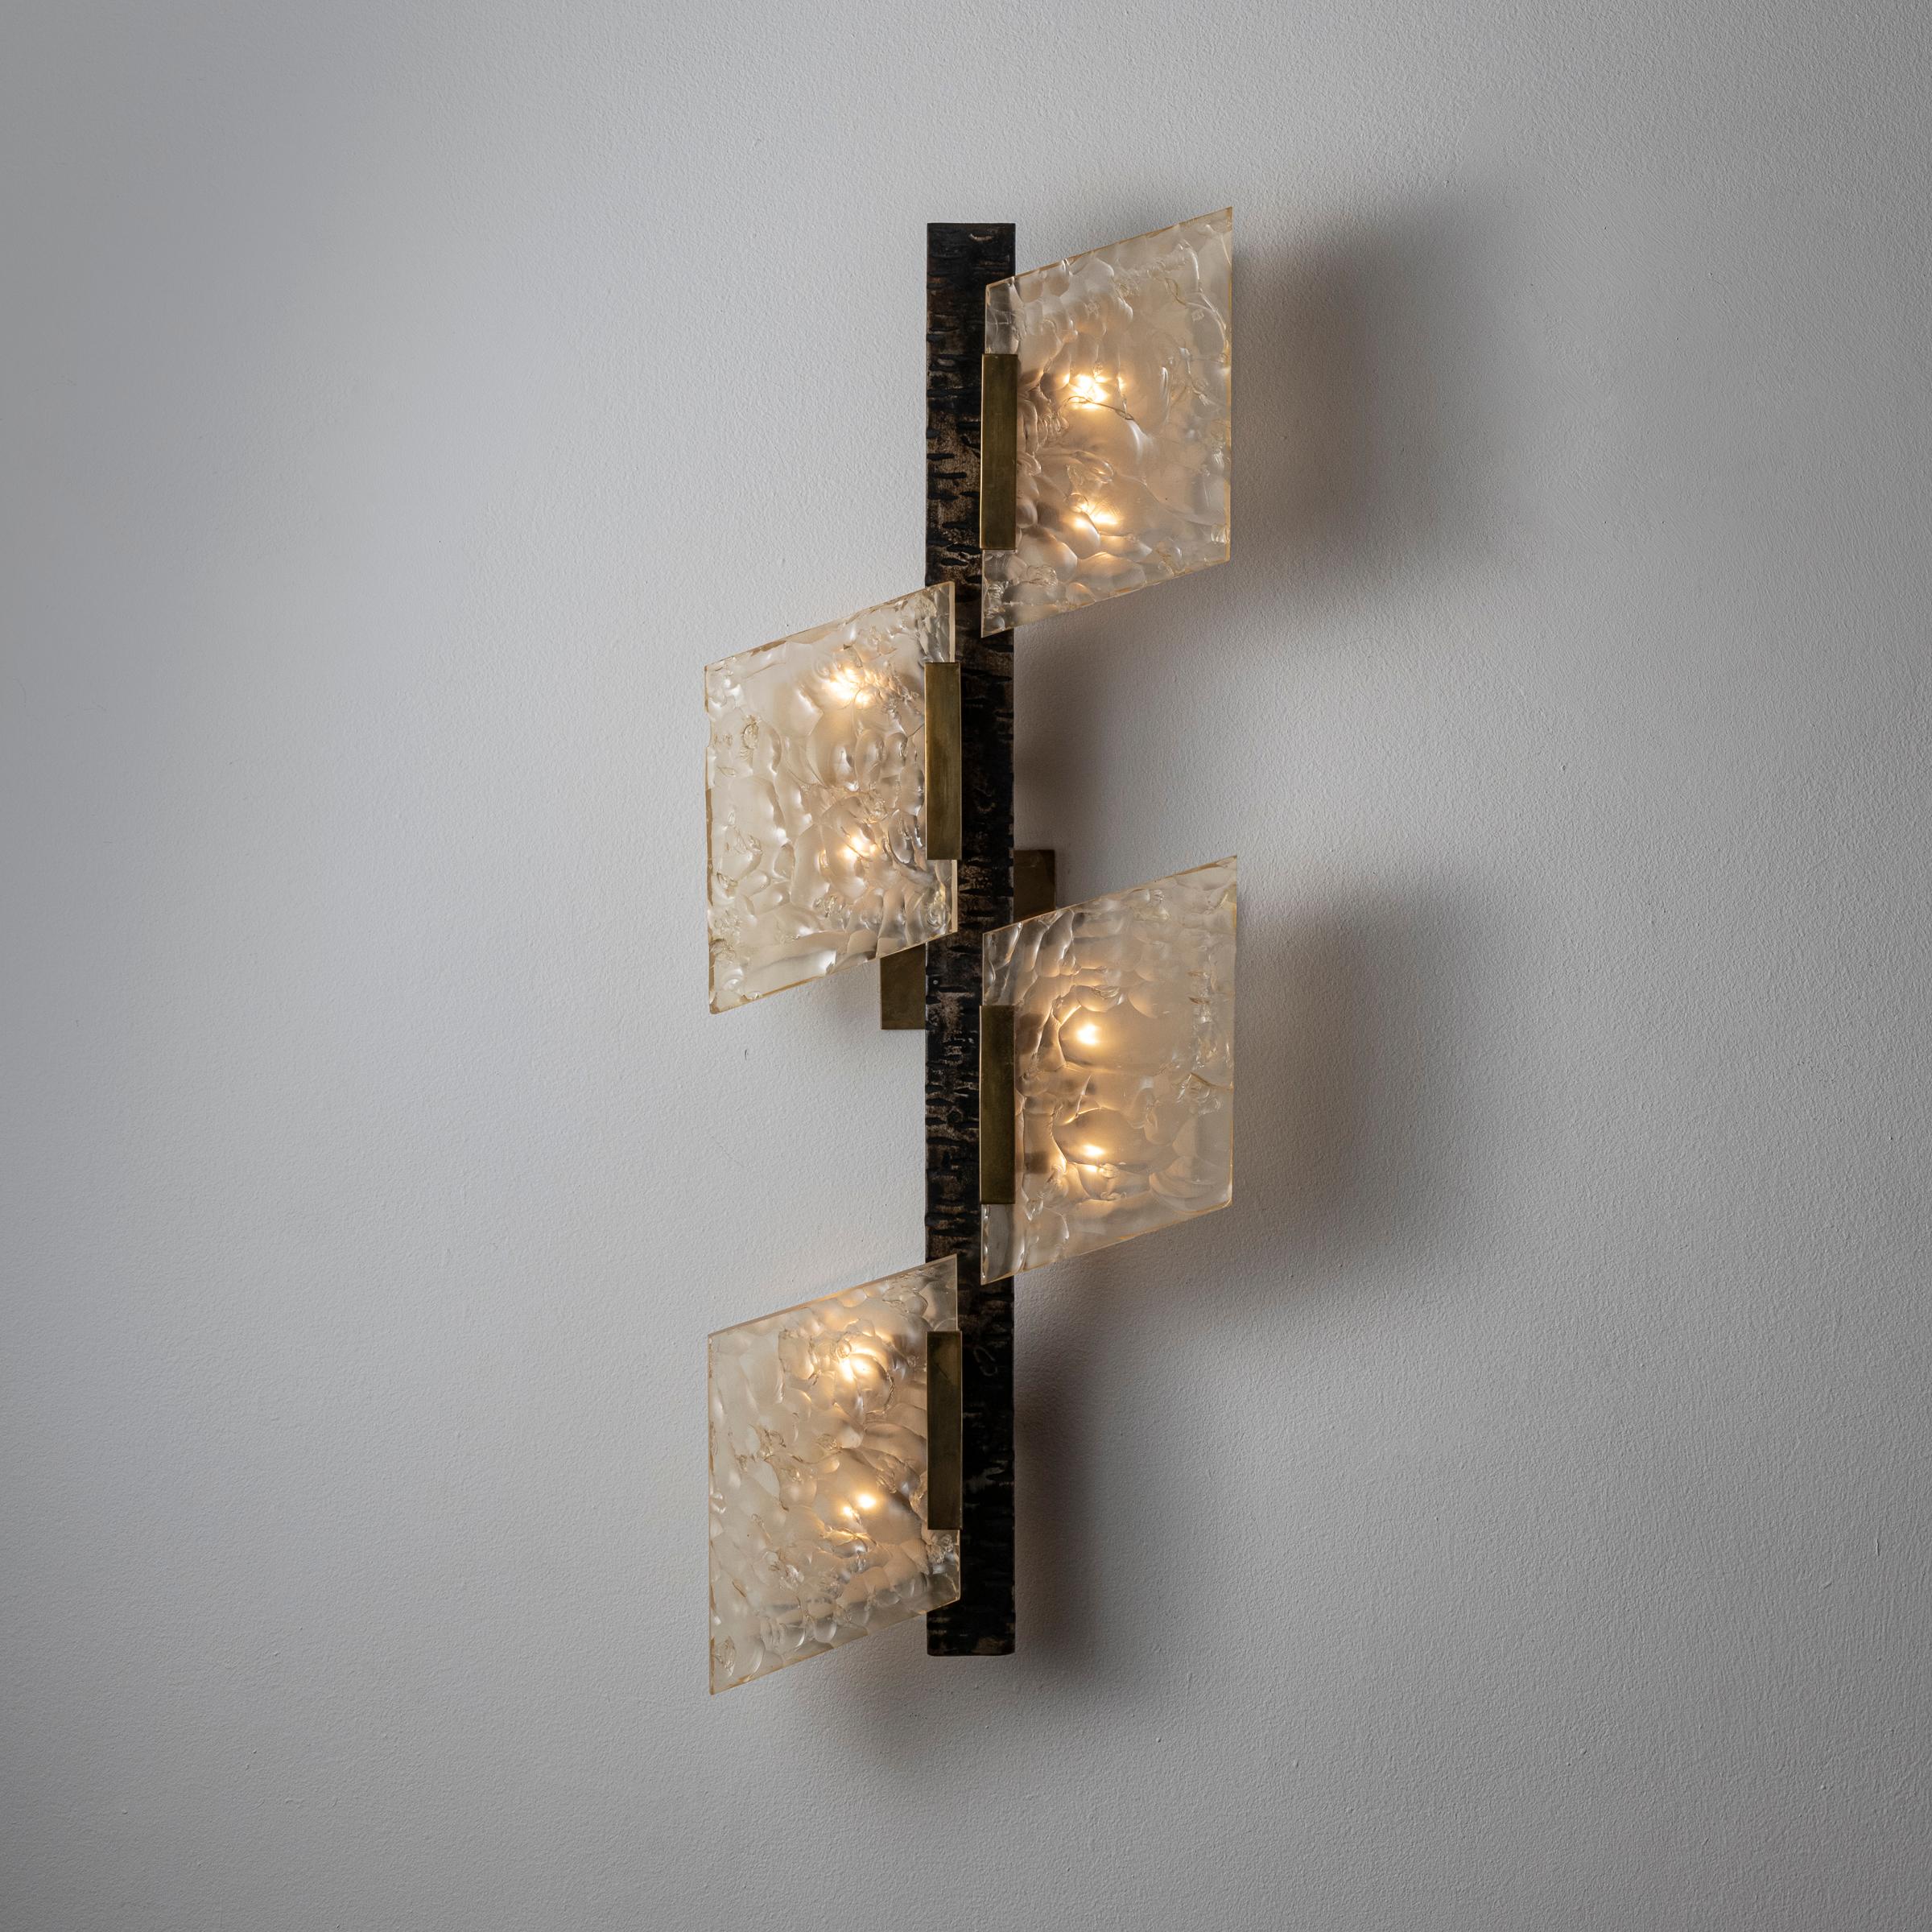 Wall light by Dallux. Manufactured in France, circa 1960's. Acrylic,brass, resin. Rewired for U.S. standards.We recommend eight E12 25w maximum candelabra bulbs. Bulbs not provided.